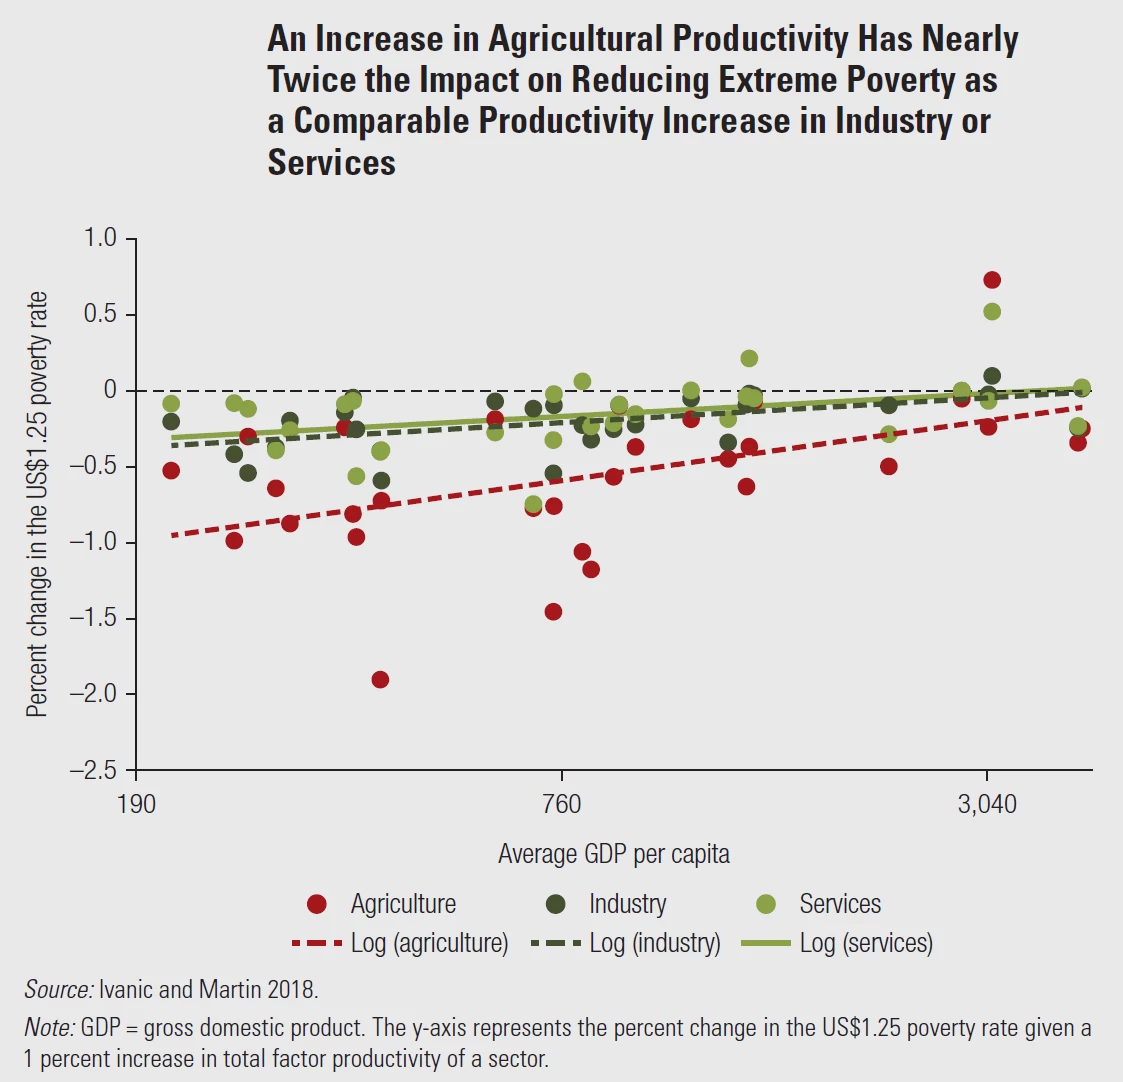 A figure from Harvesting Prosperity Report indicating an Increase in Agricultural Productivity Has Nearly Twice the Impact on Reducing Extreme Poverty as a Comparable Productivity Increase in Industry or Services